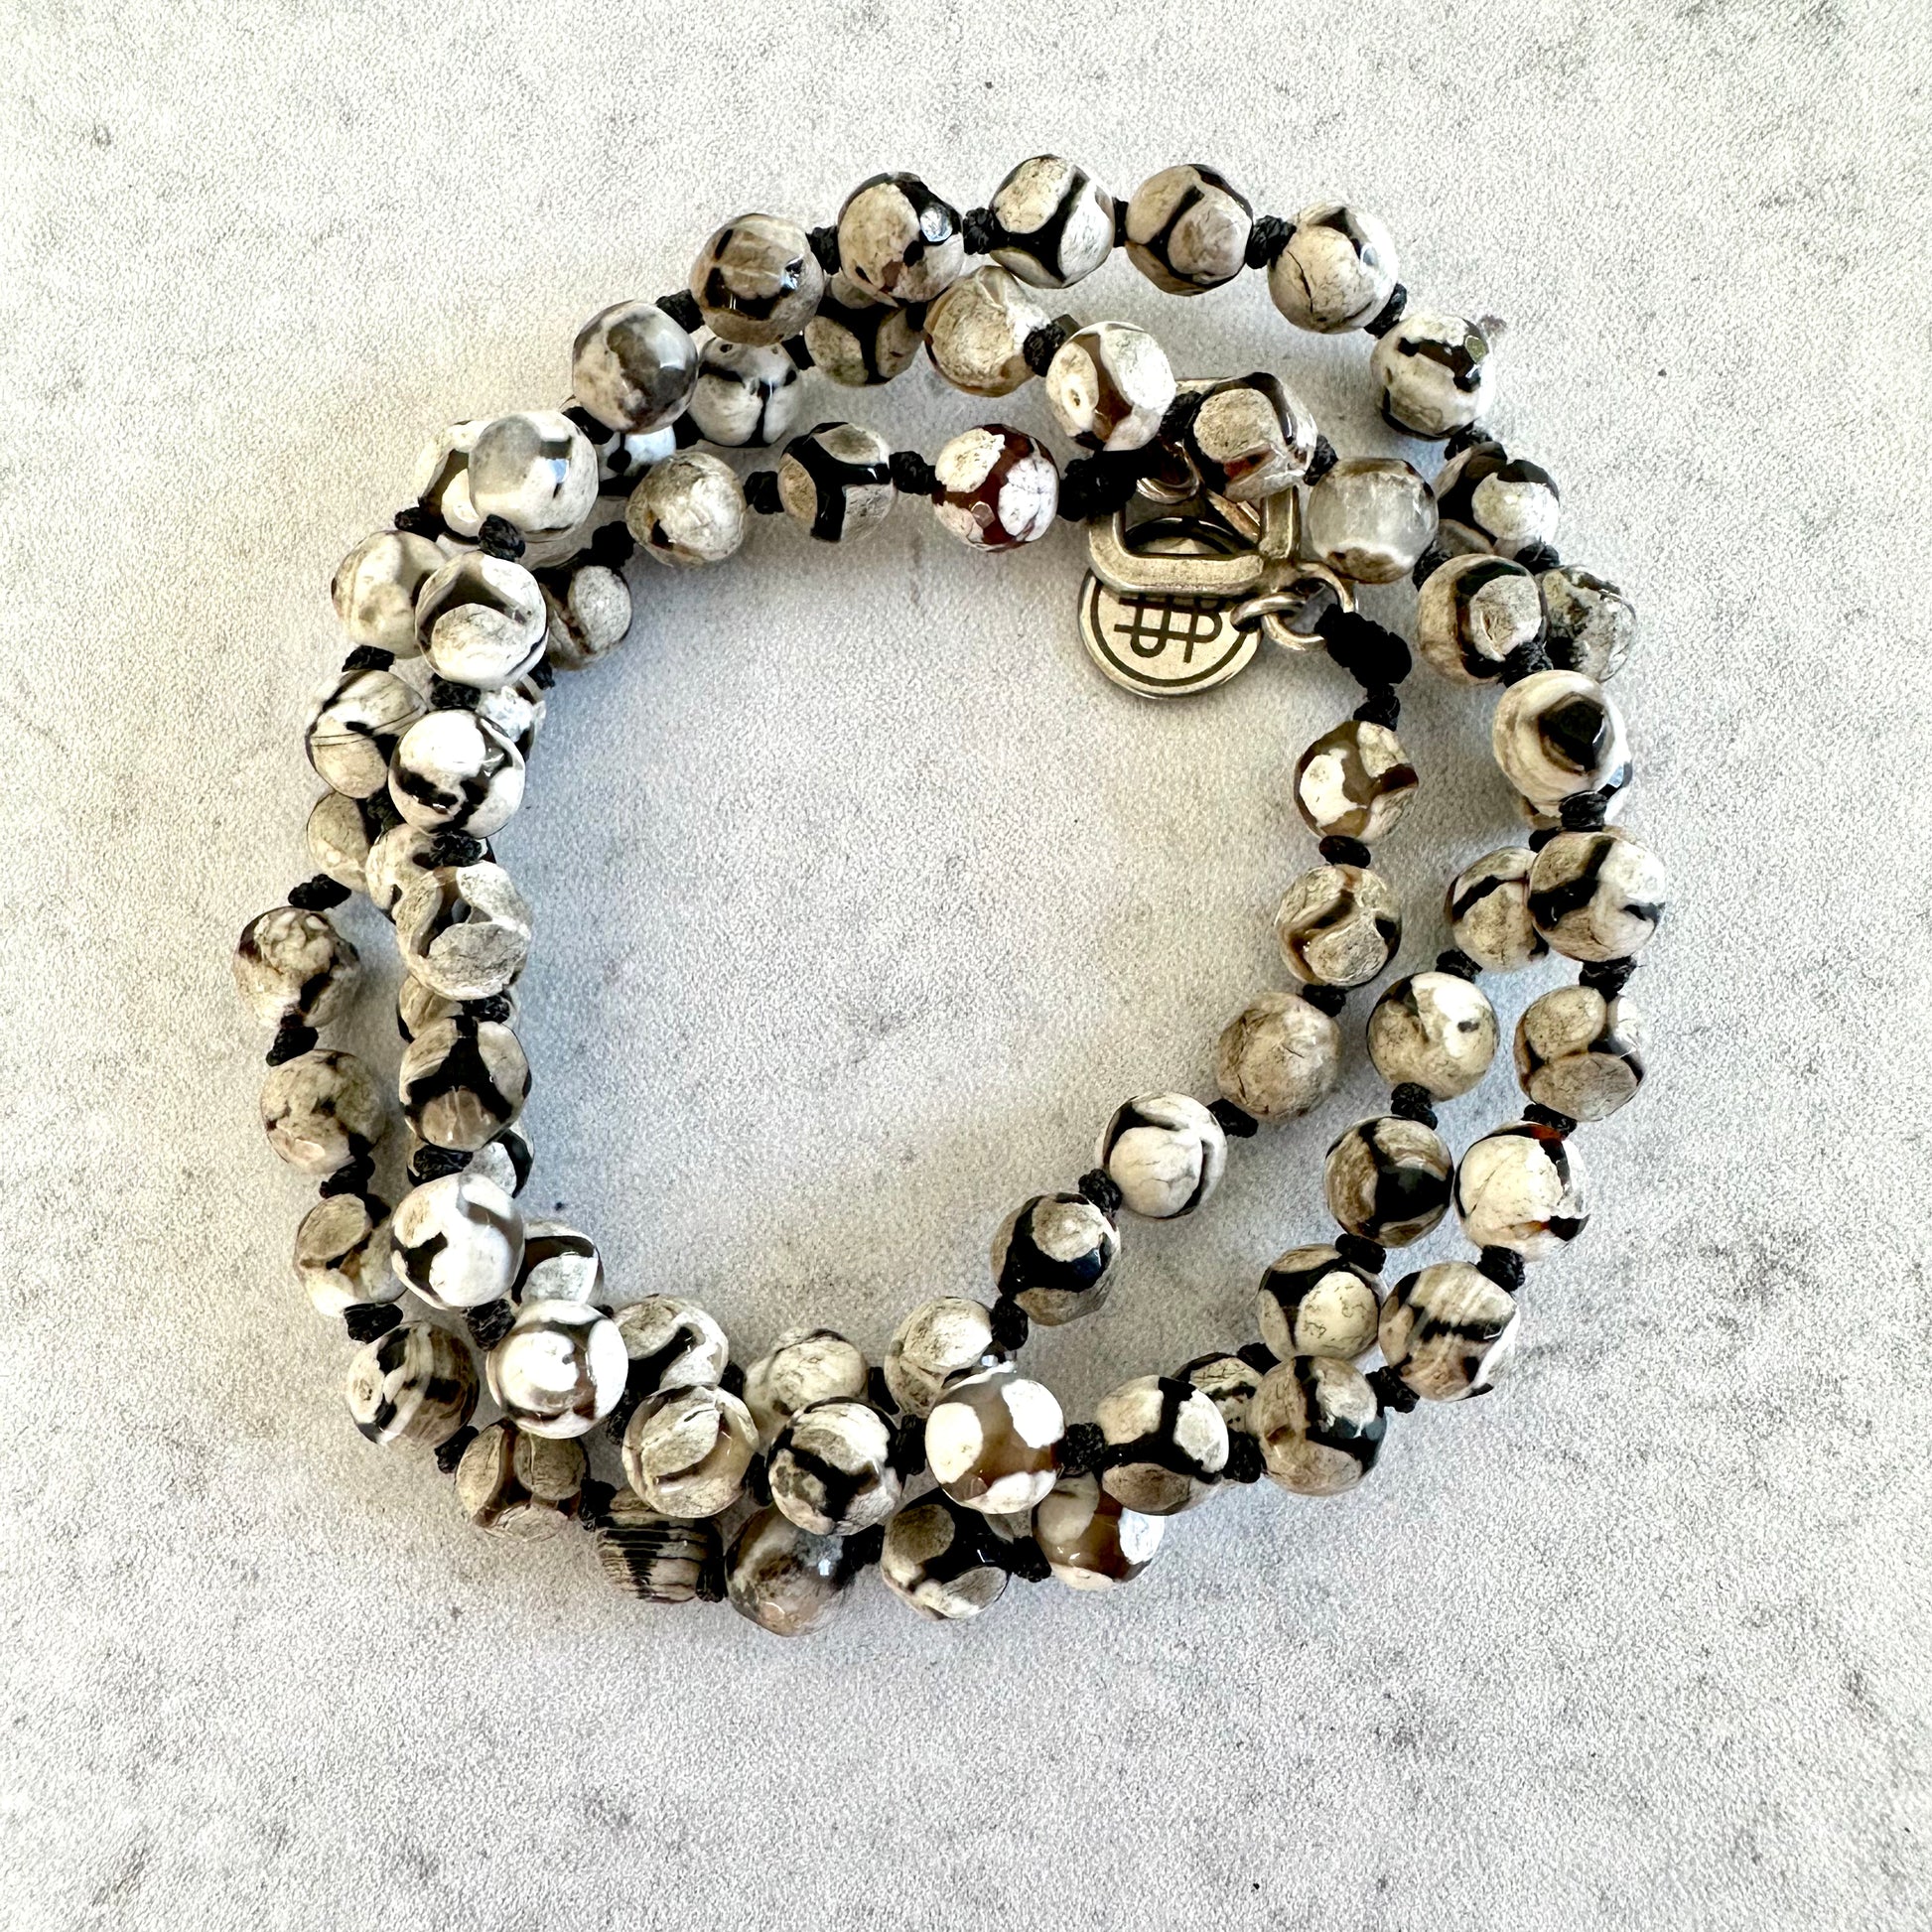 Black and white gemstone and sterling silver womens bracelet